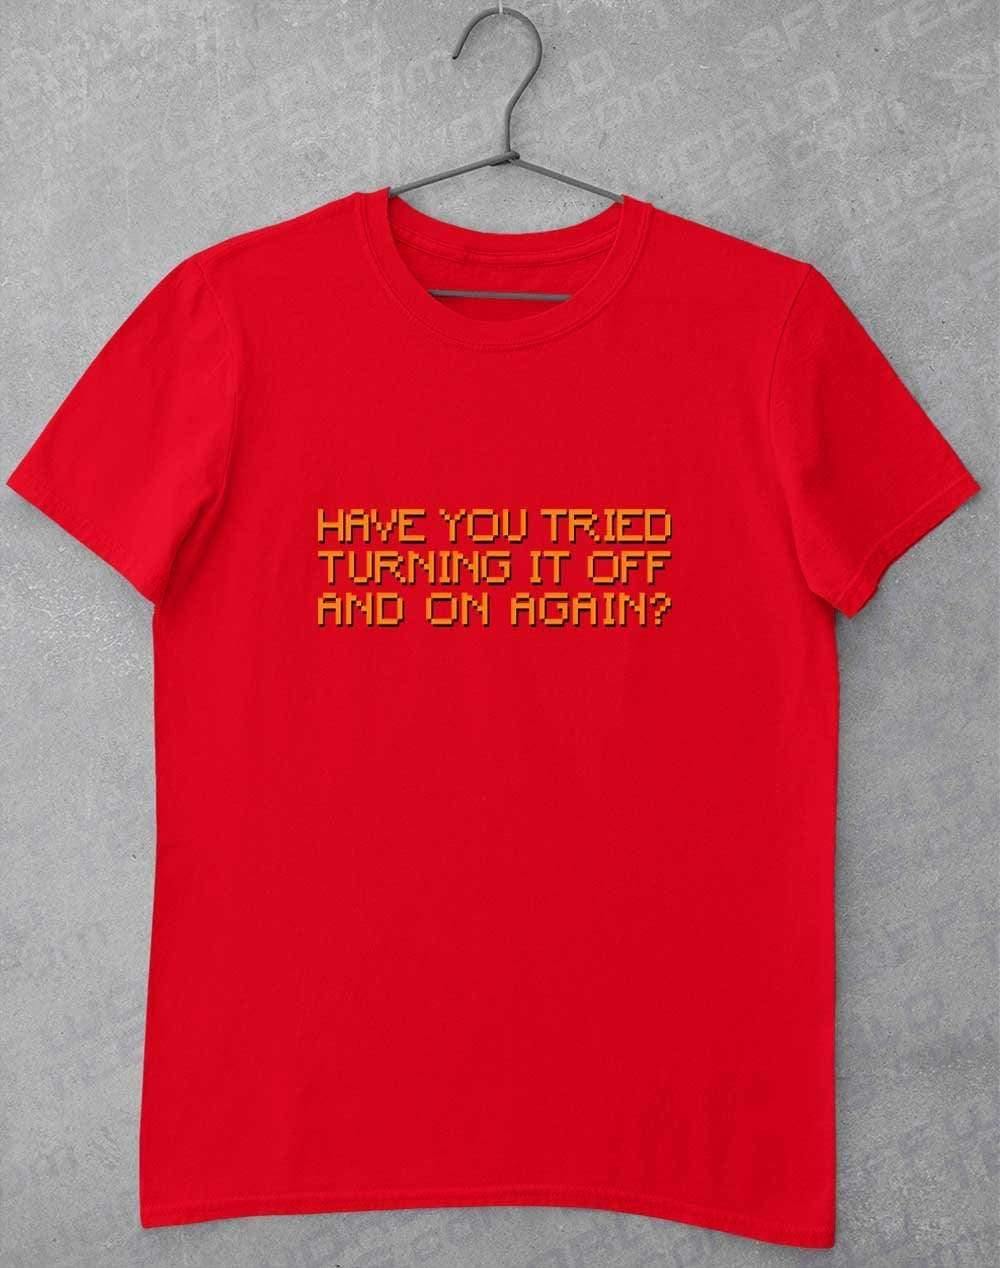 Off and On Again T-Shirt S / Red  - Off World Tees